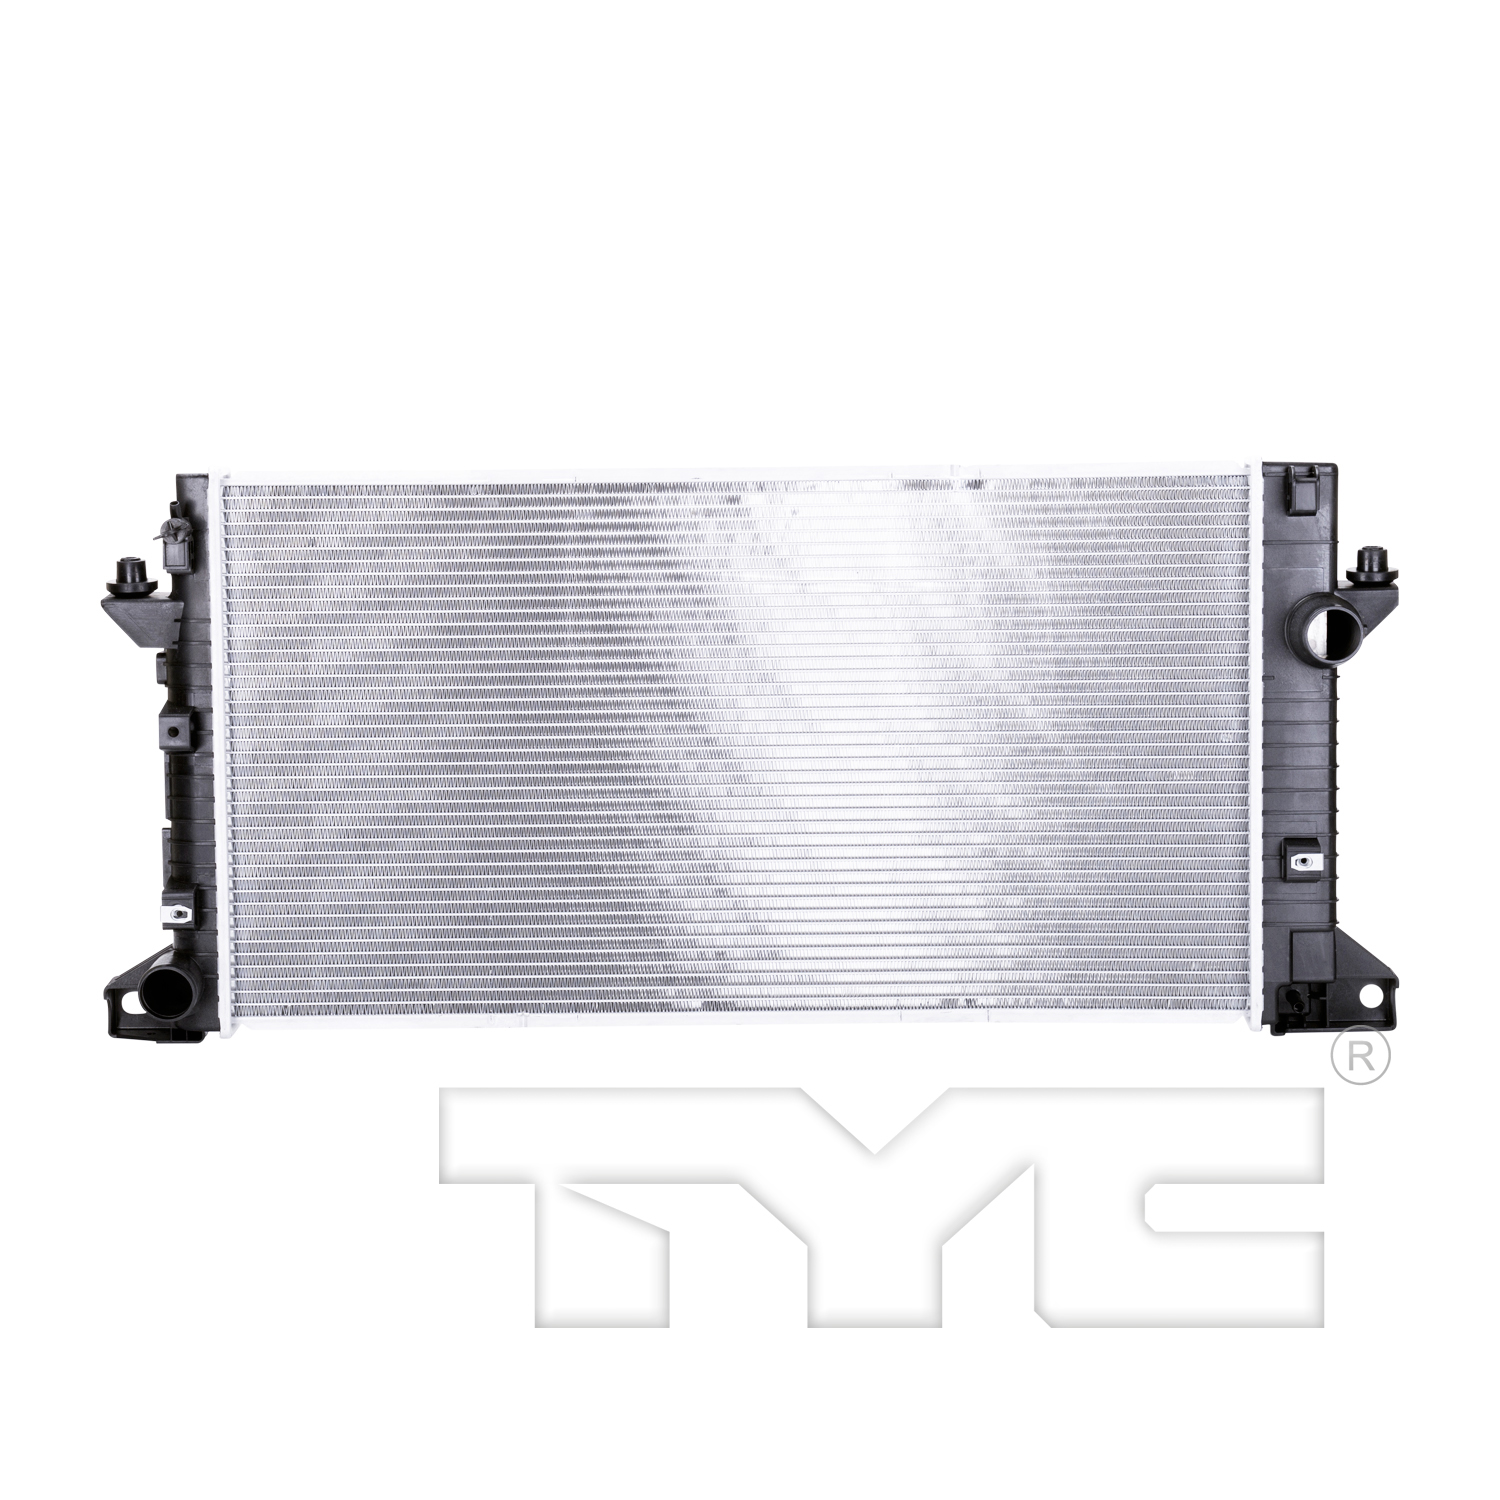 Aftermarket RADIATORS for FORD - EXPEDITION, EXPEDITION,07-08,Radiator assembly